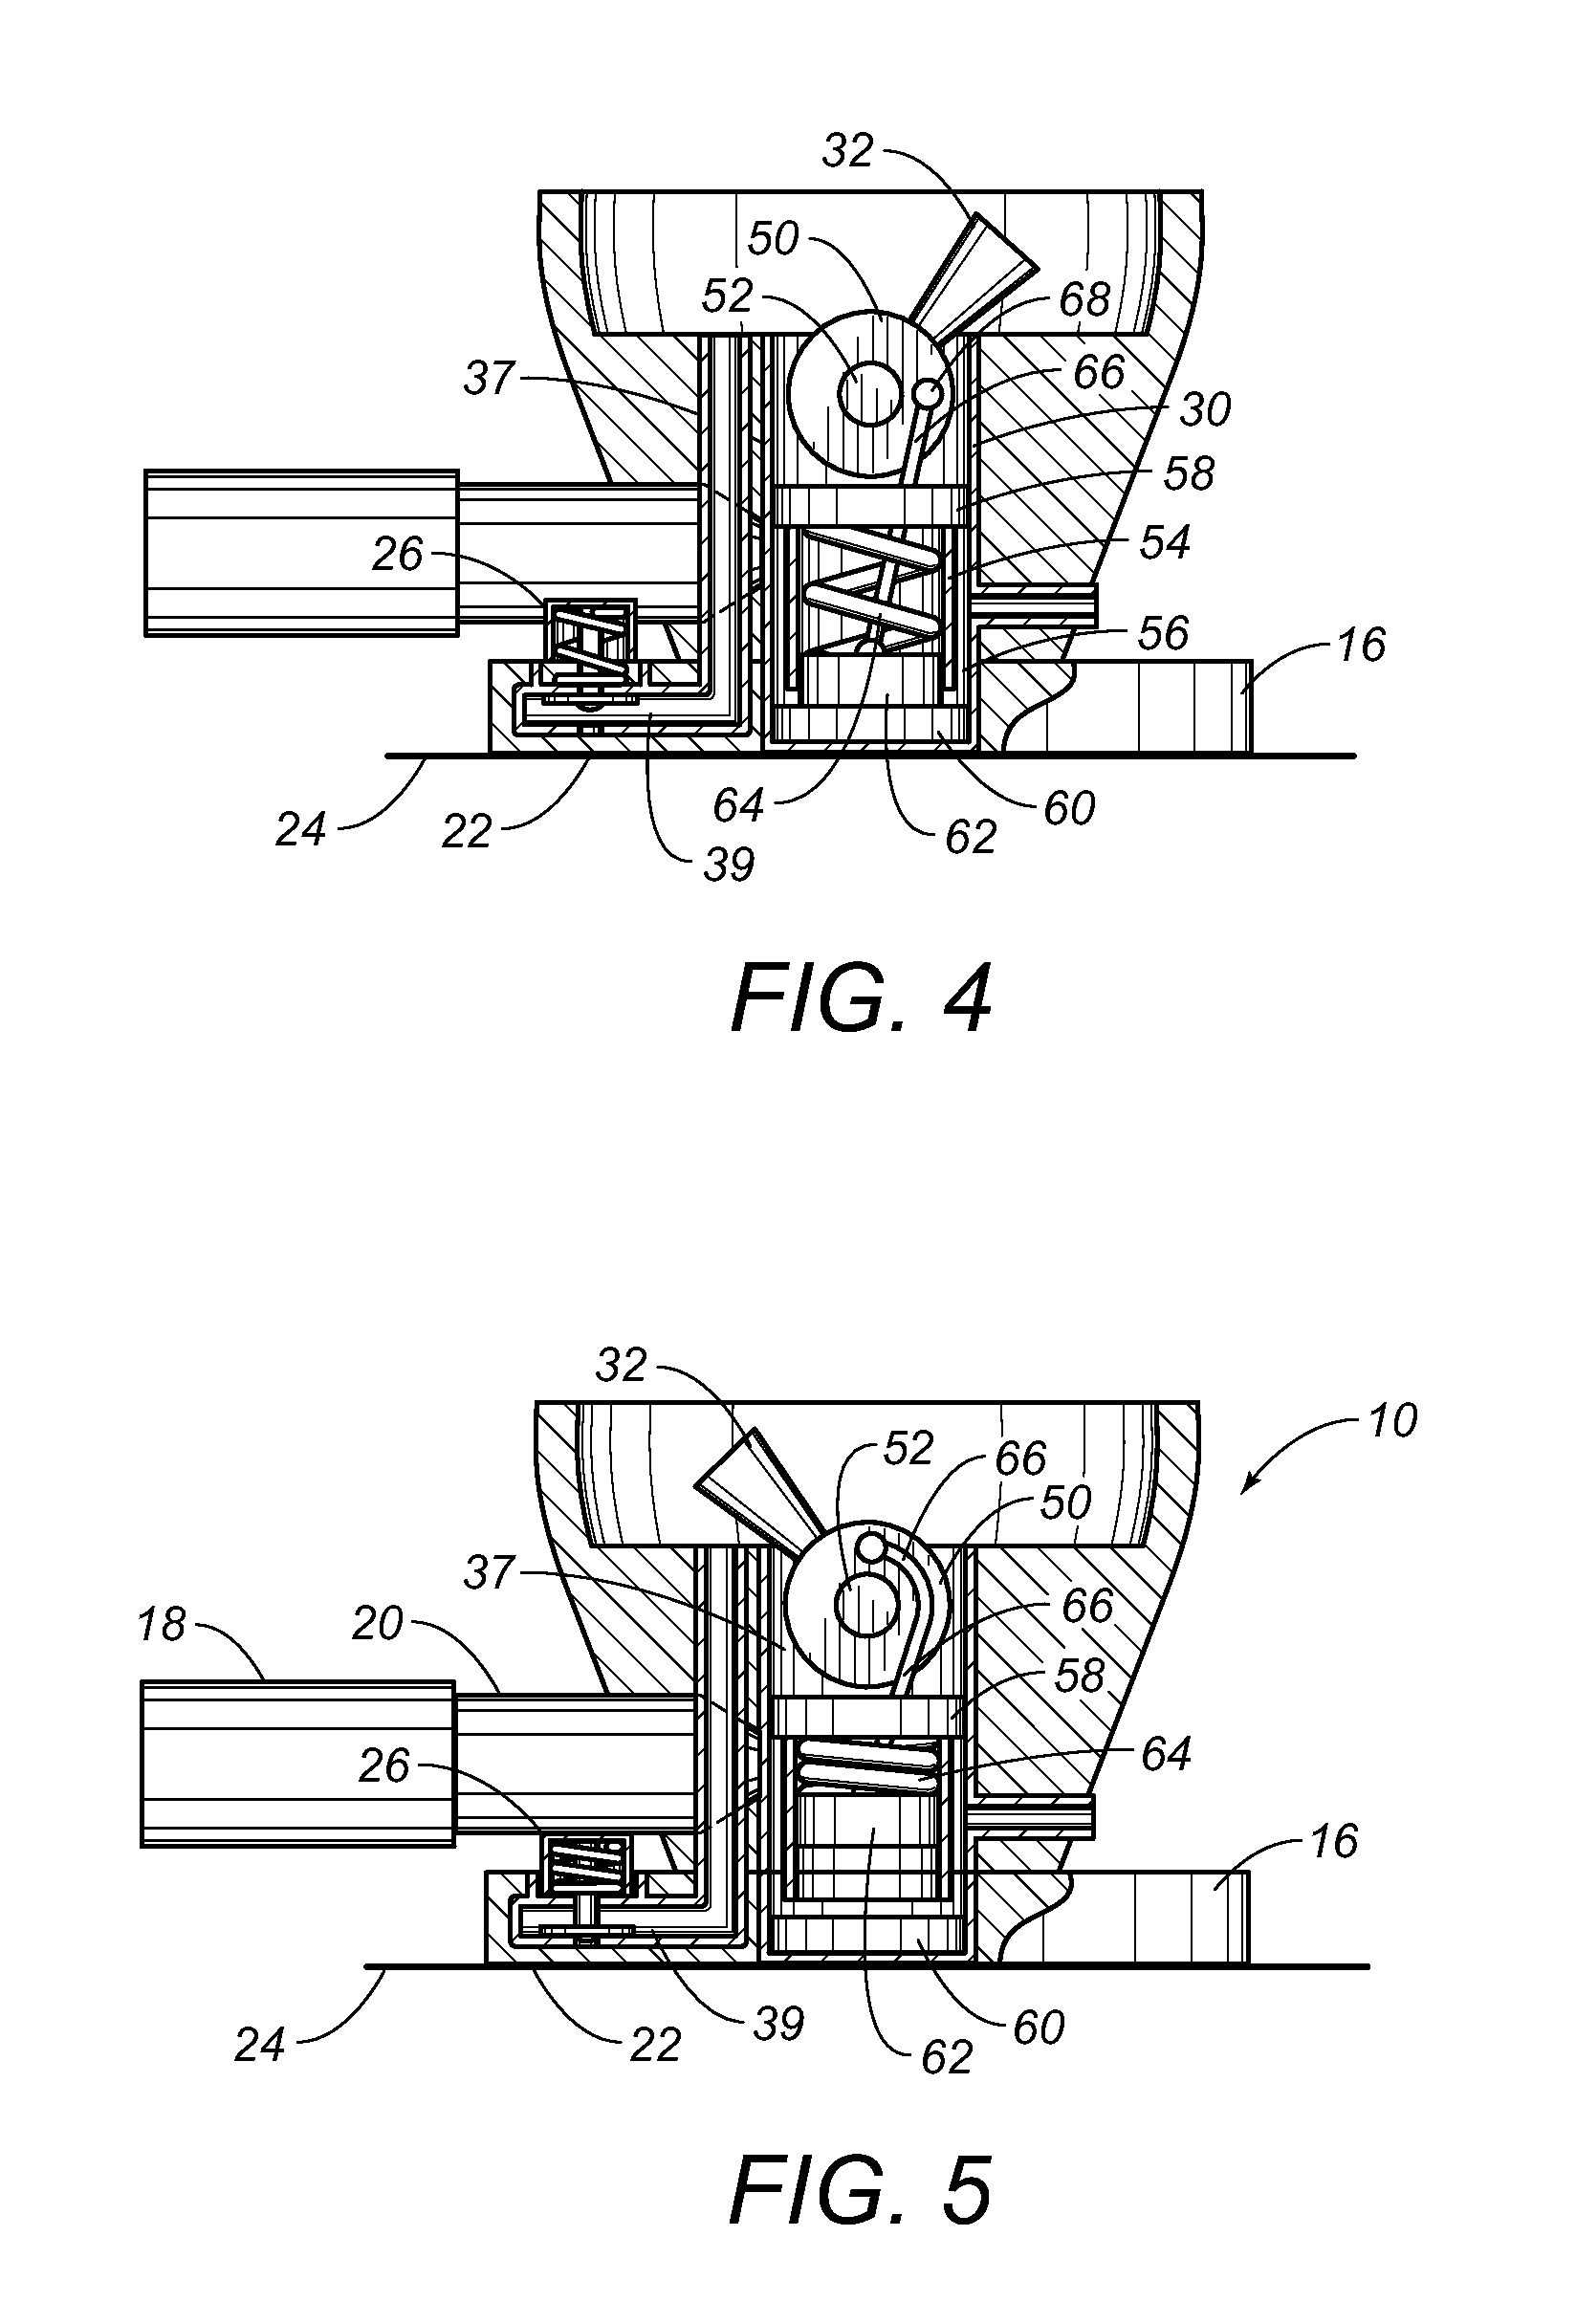 Apparatus and method for auscultation and percussion of a human or animal body